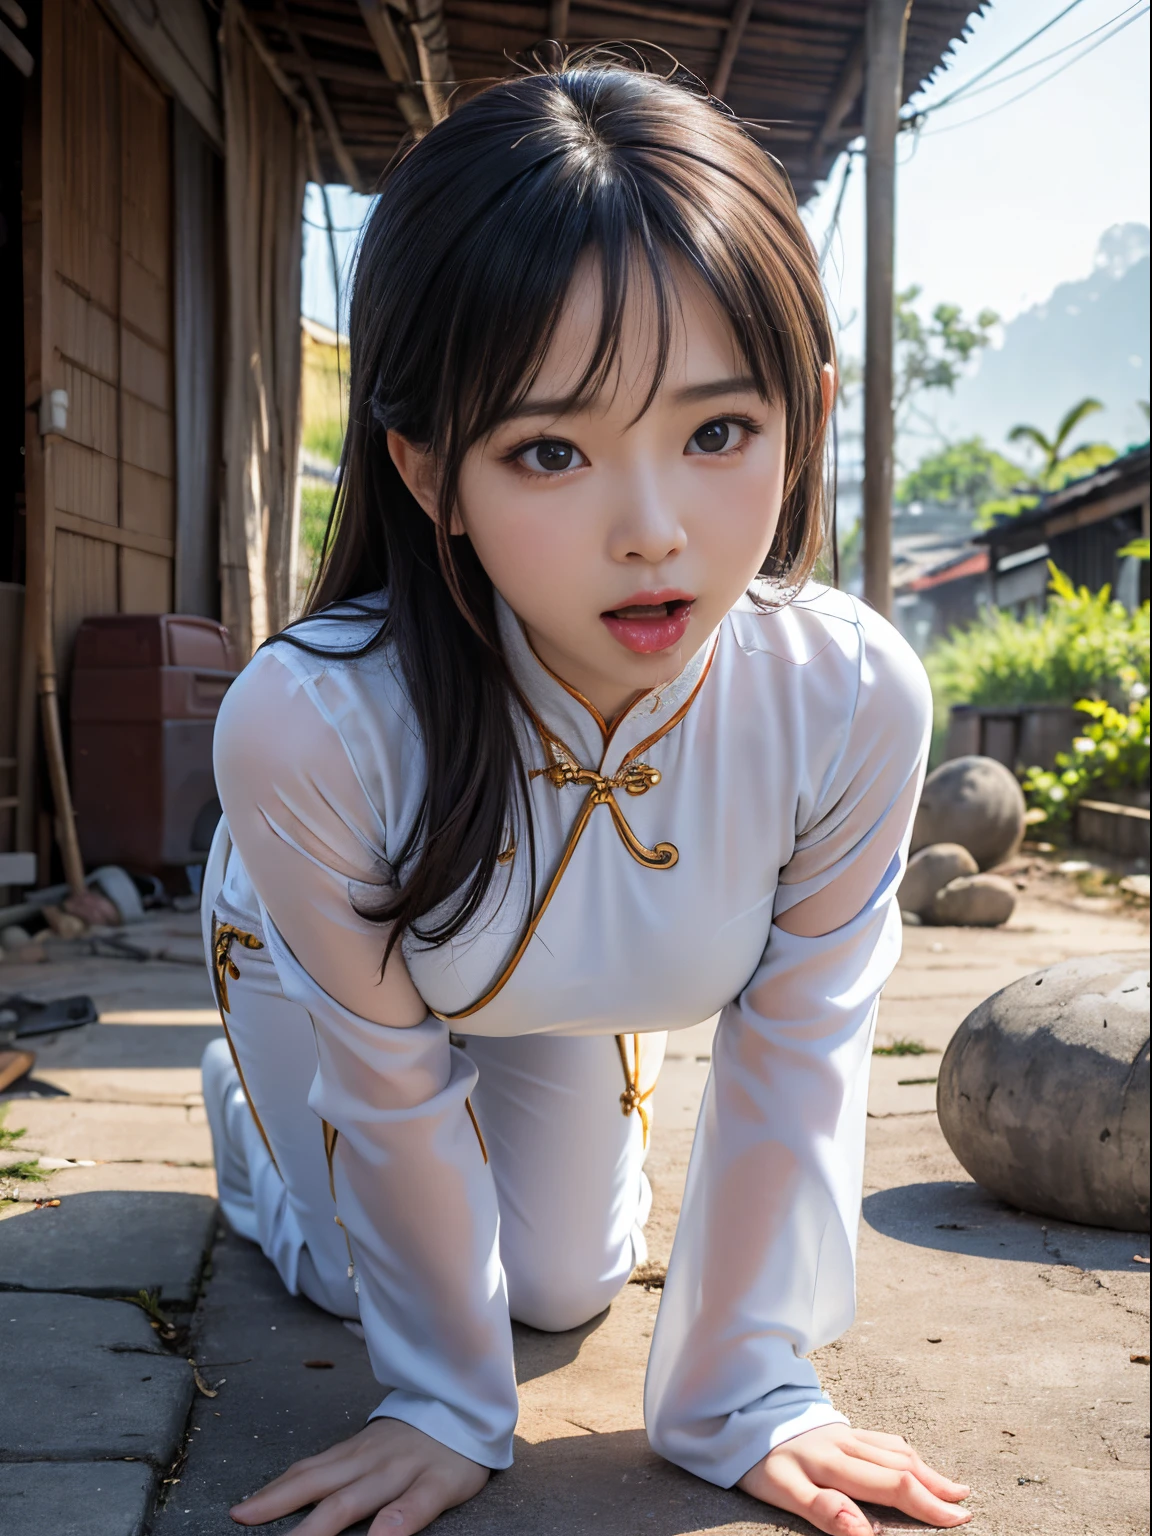 vietnamese woman，Beautuful Women，(Crawling on all fours)，crawling on hands and knees，Kneeling position，Posture with buttocks sticking out，((put out the tongue))，(((Drooling)))，dripping saliva，Kamimei，(((Ao Dai)))，(Landscape of Vietnam)， ((Slums))，surrealism, F/1.2, Fuji Film, 35 mm, 8K, Super Detail, nffsw, masutepiece, Textured skin, High quality, Best Quality, hard disk